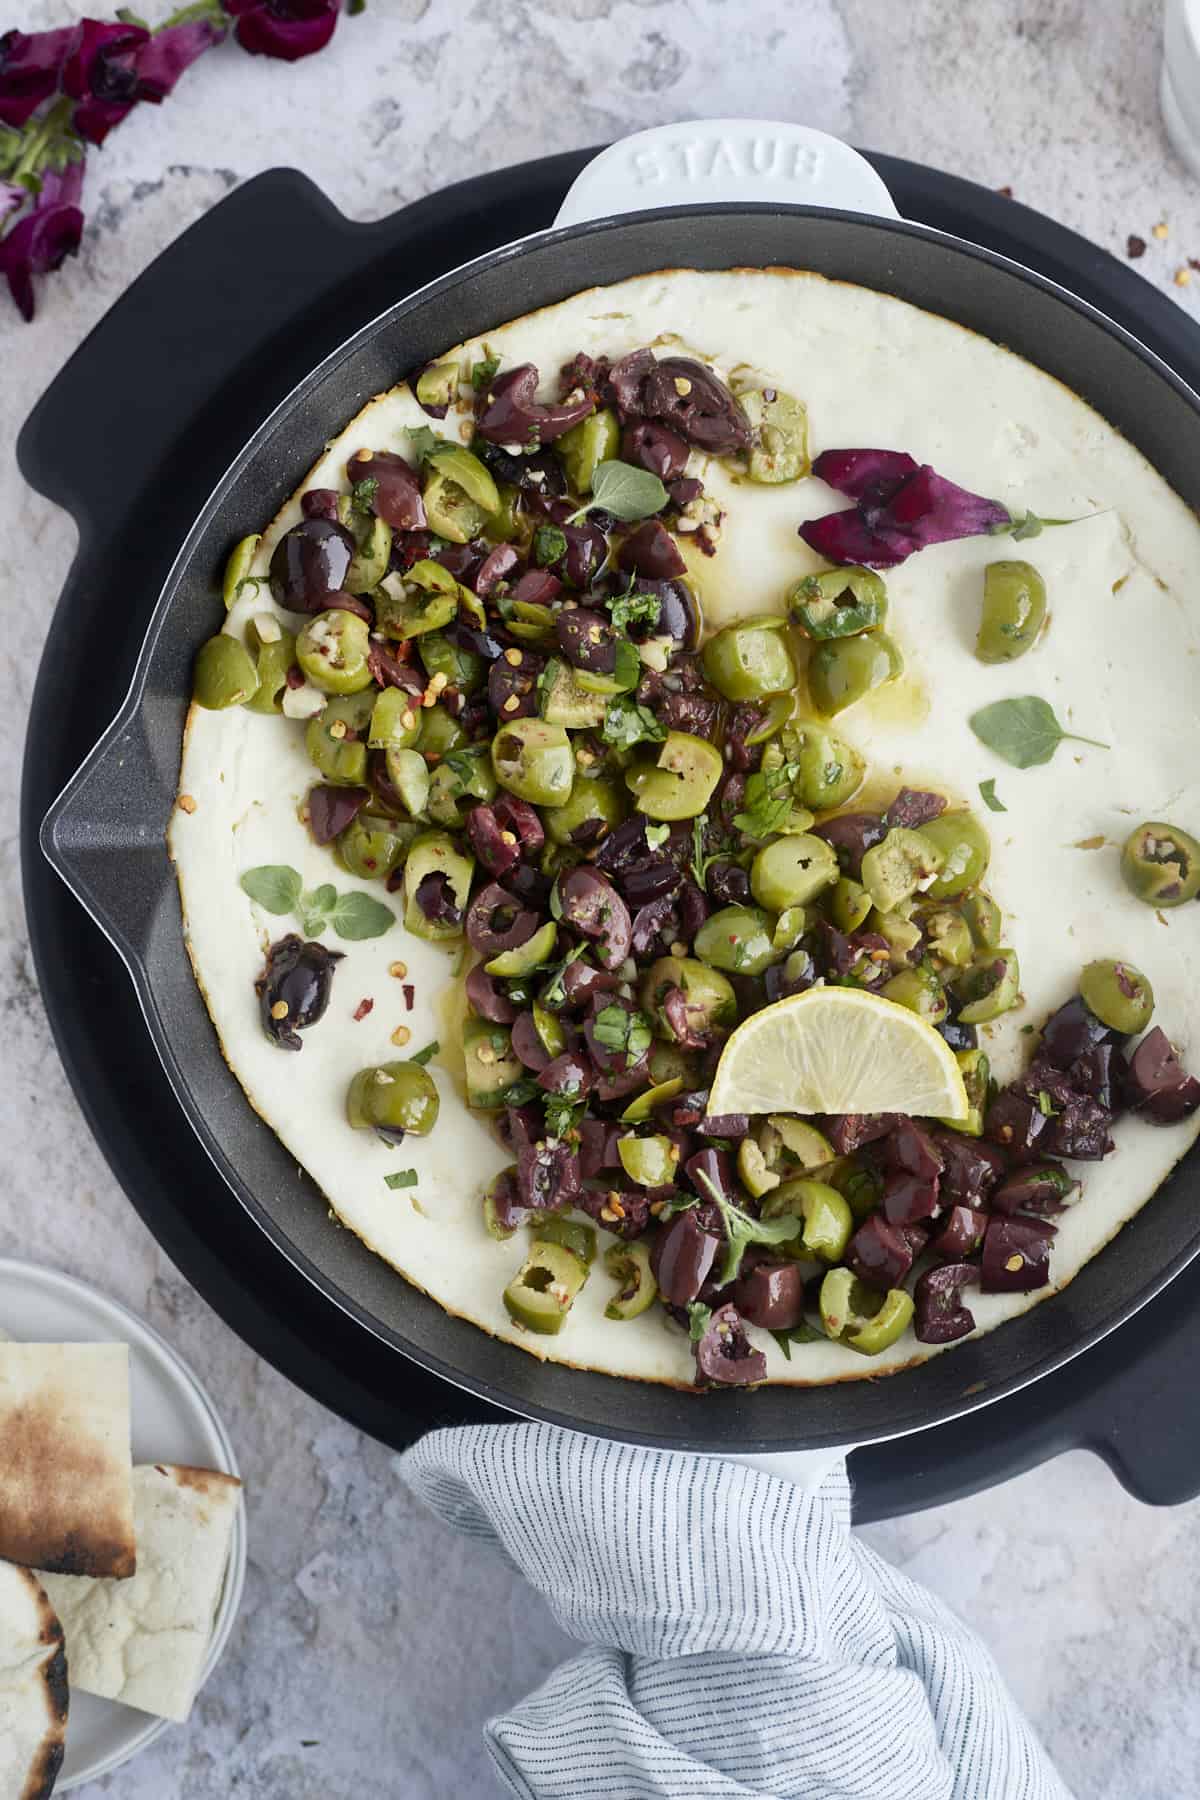 Warm Feta Dip with Marinated Olives